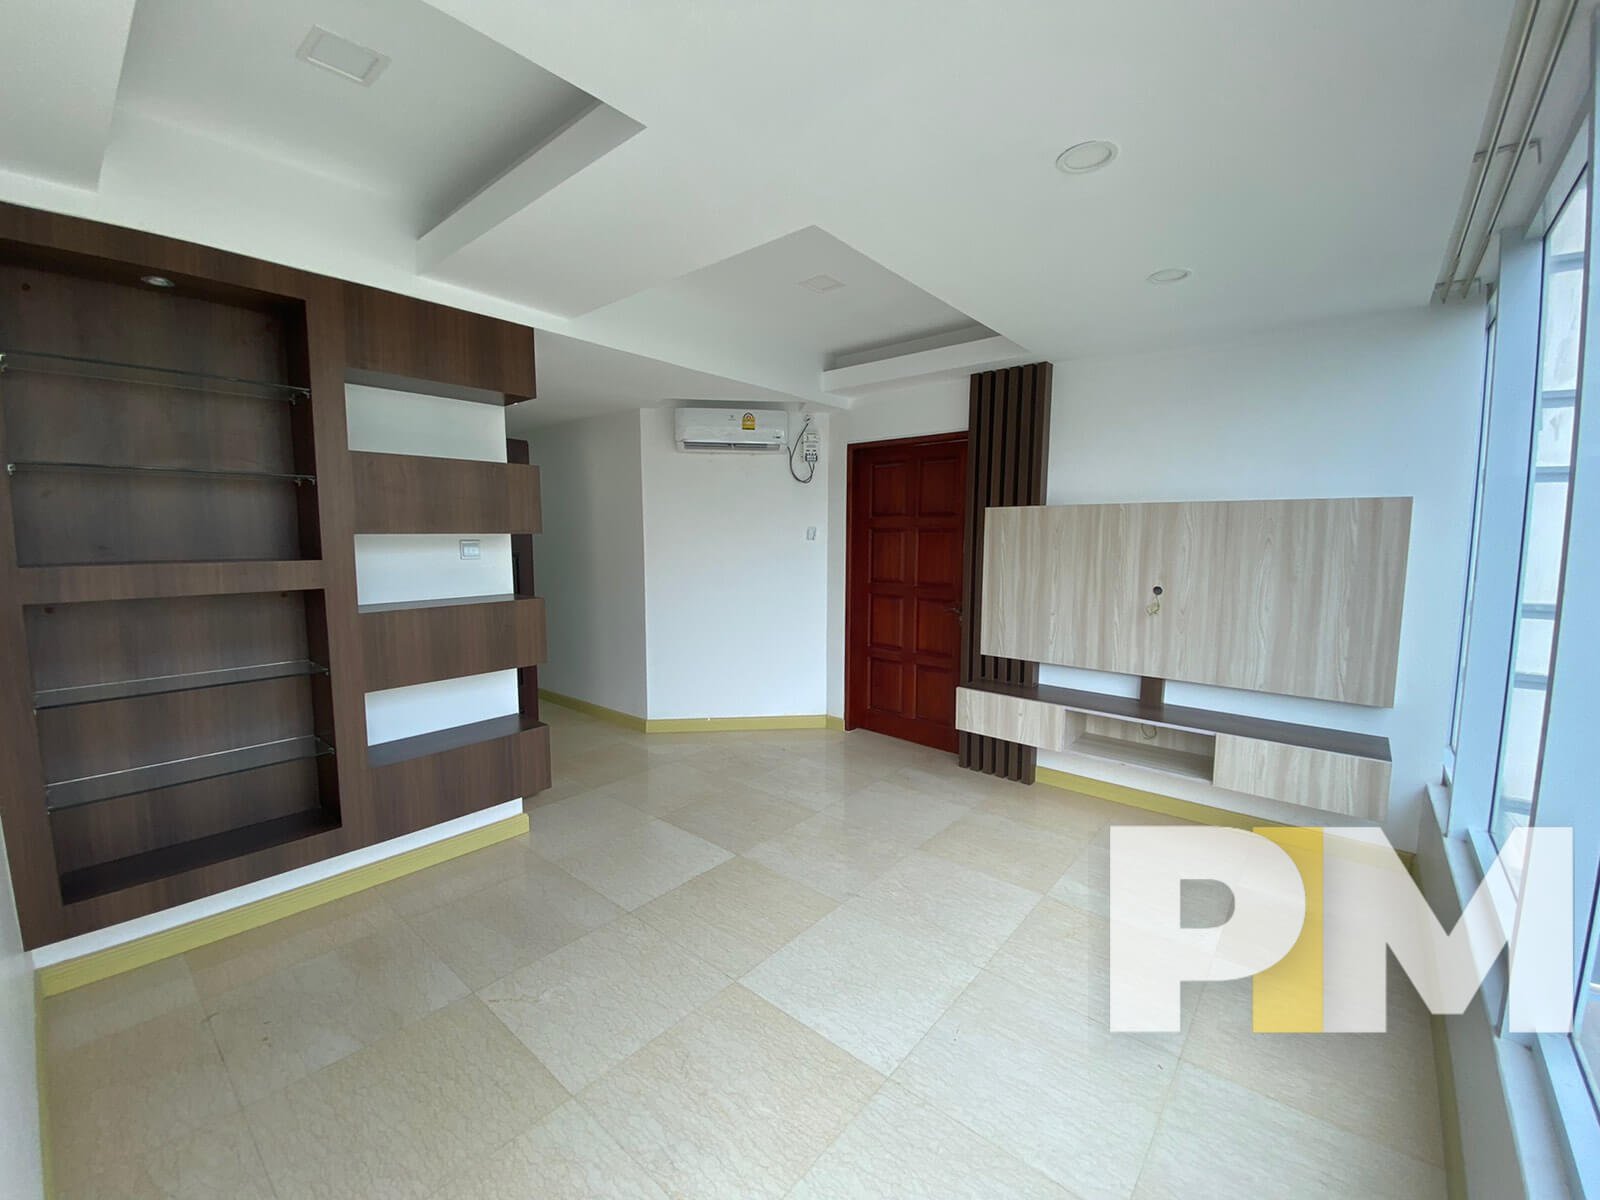 living room with TV stand - Yangon Real Estate